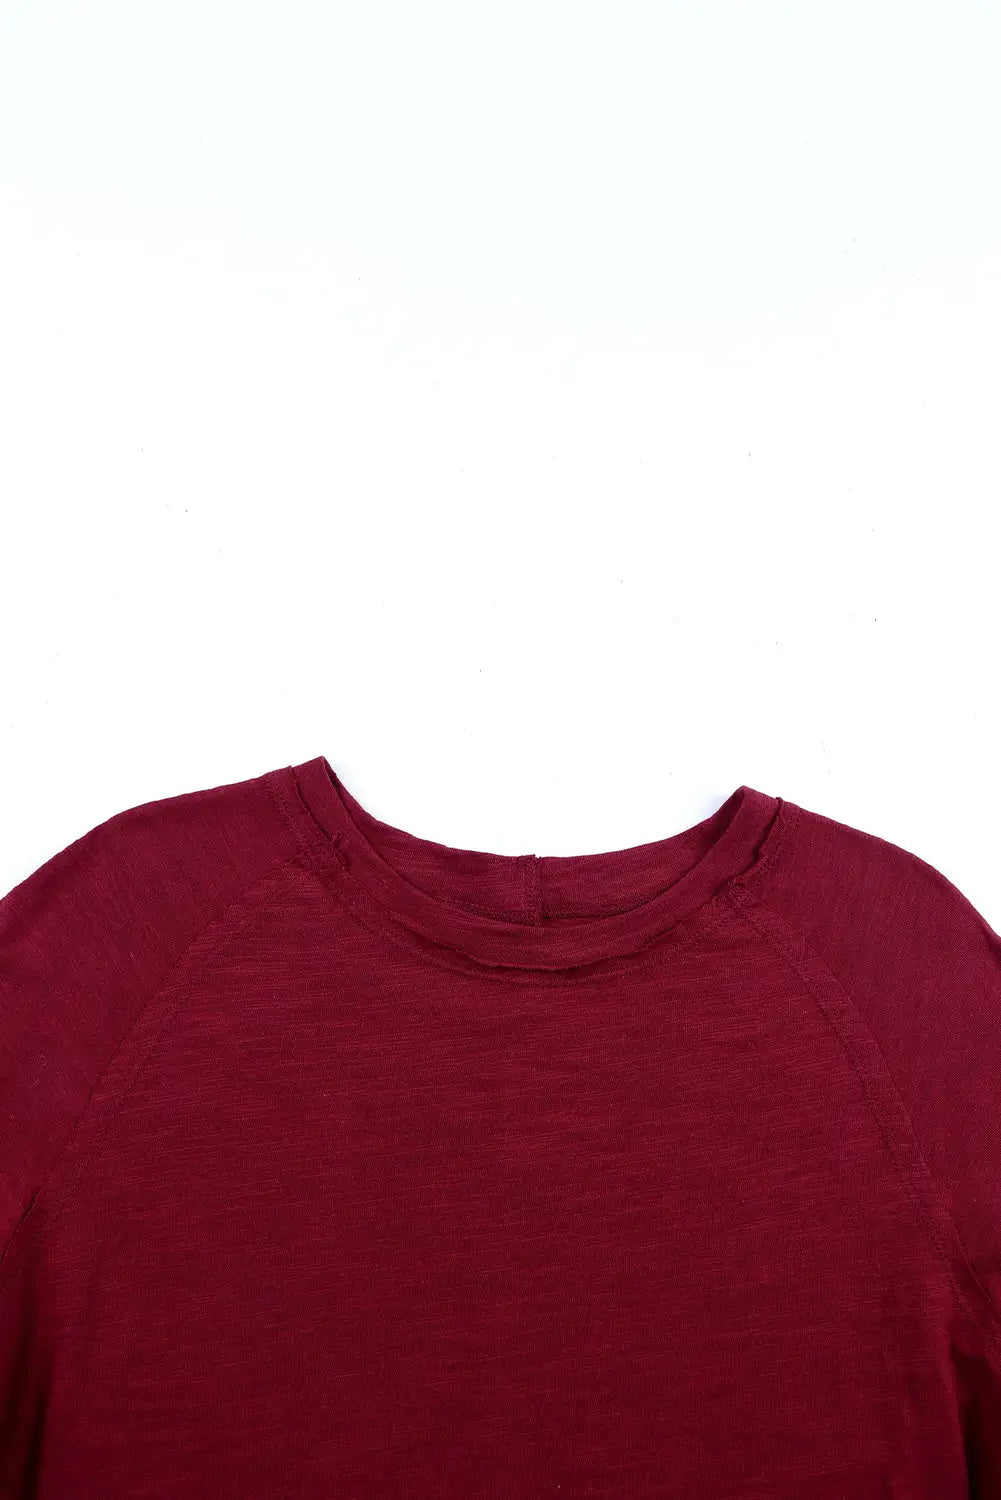 Red solid crew neck long sleeve top - tops